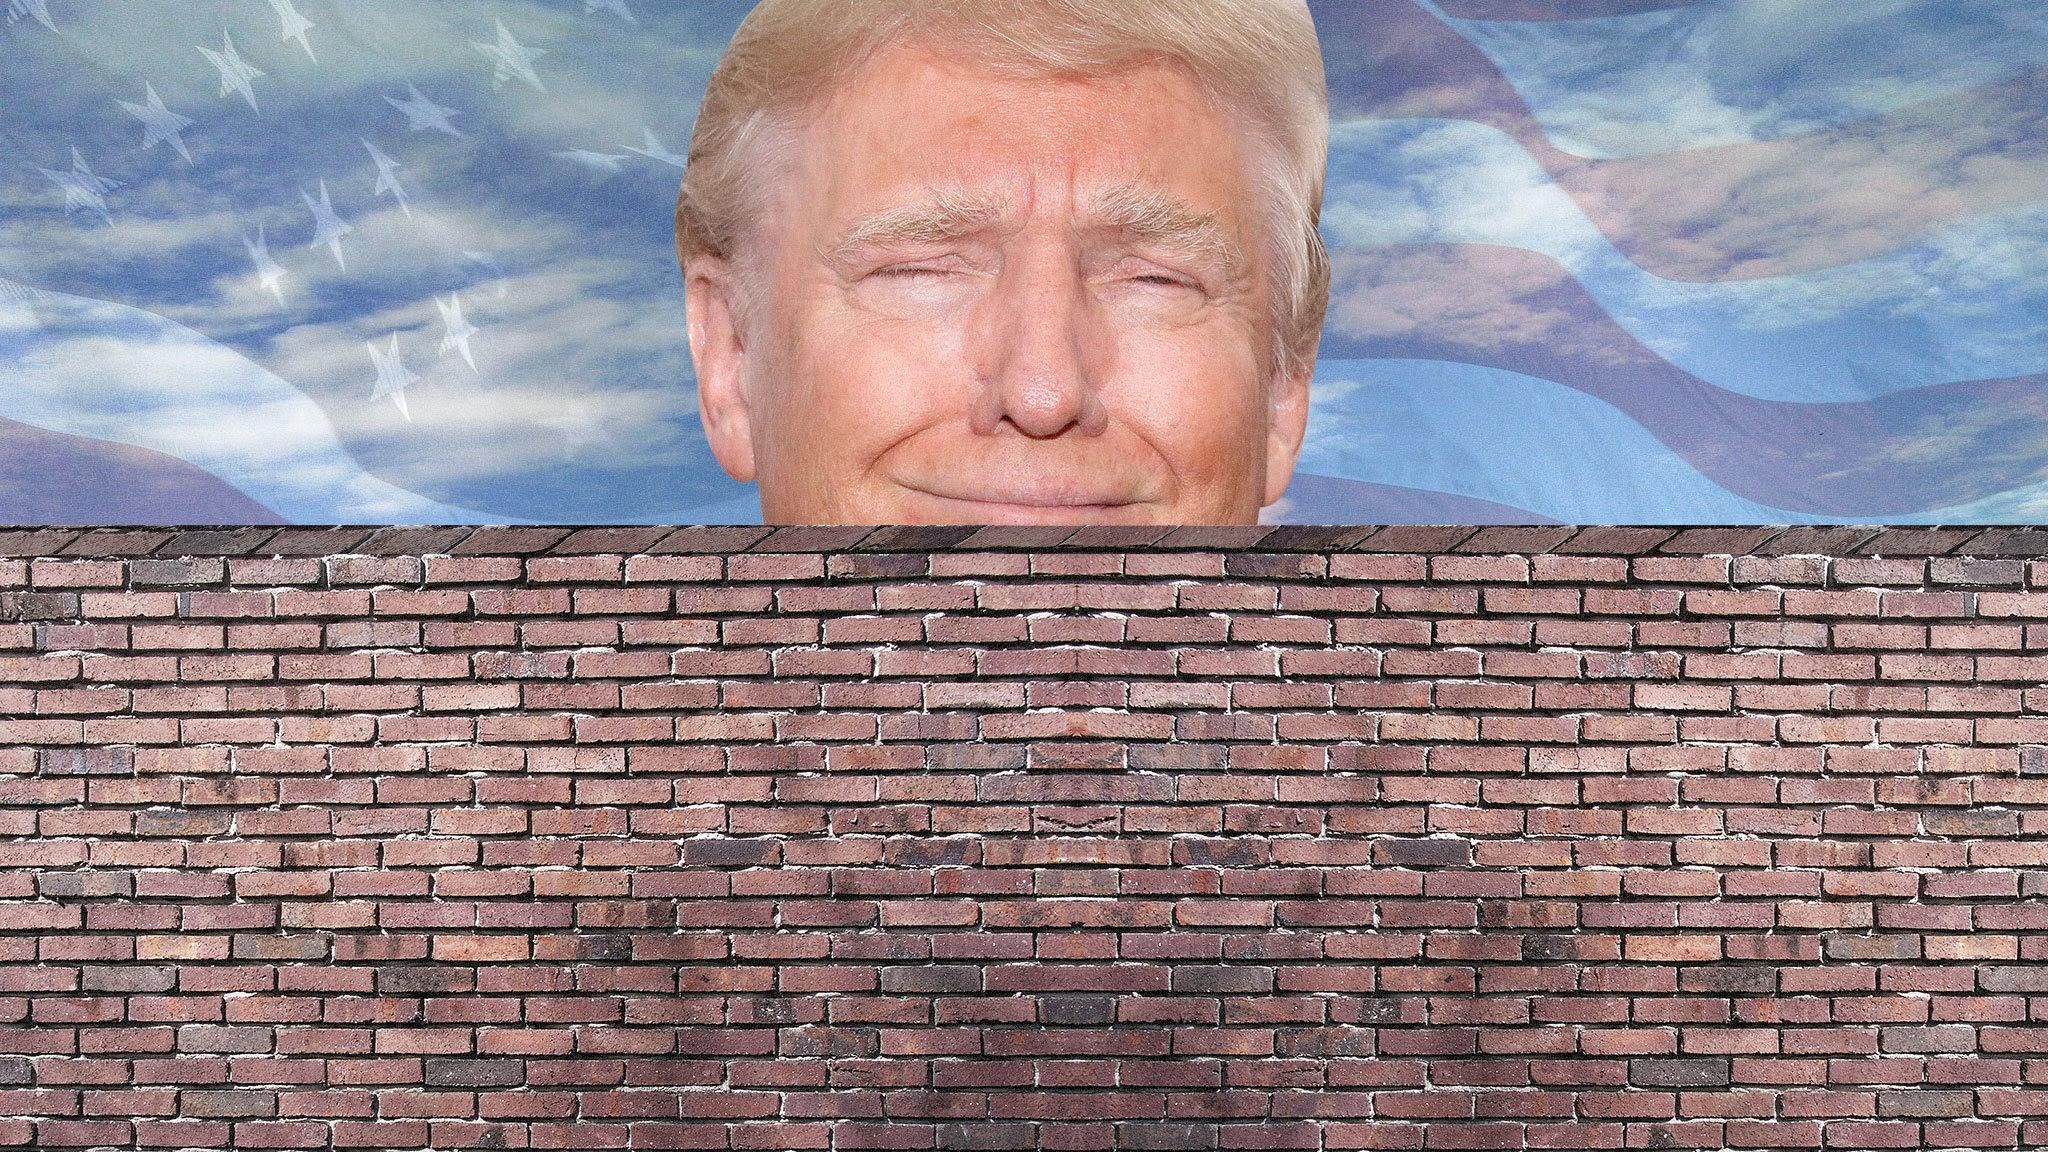 President Trump To Impose Tax On Mexico To Pay For The Great Wall, While Presidente de Mexico Enrique Pena Nieto Cancels Talks With U.S. President !